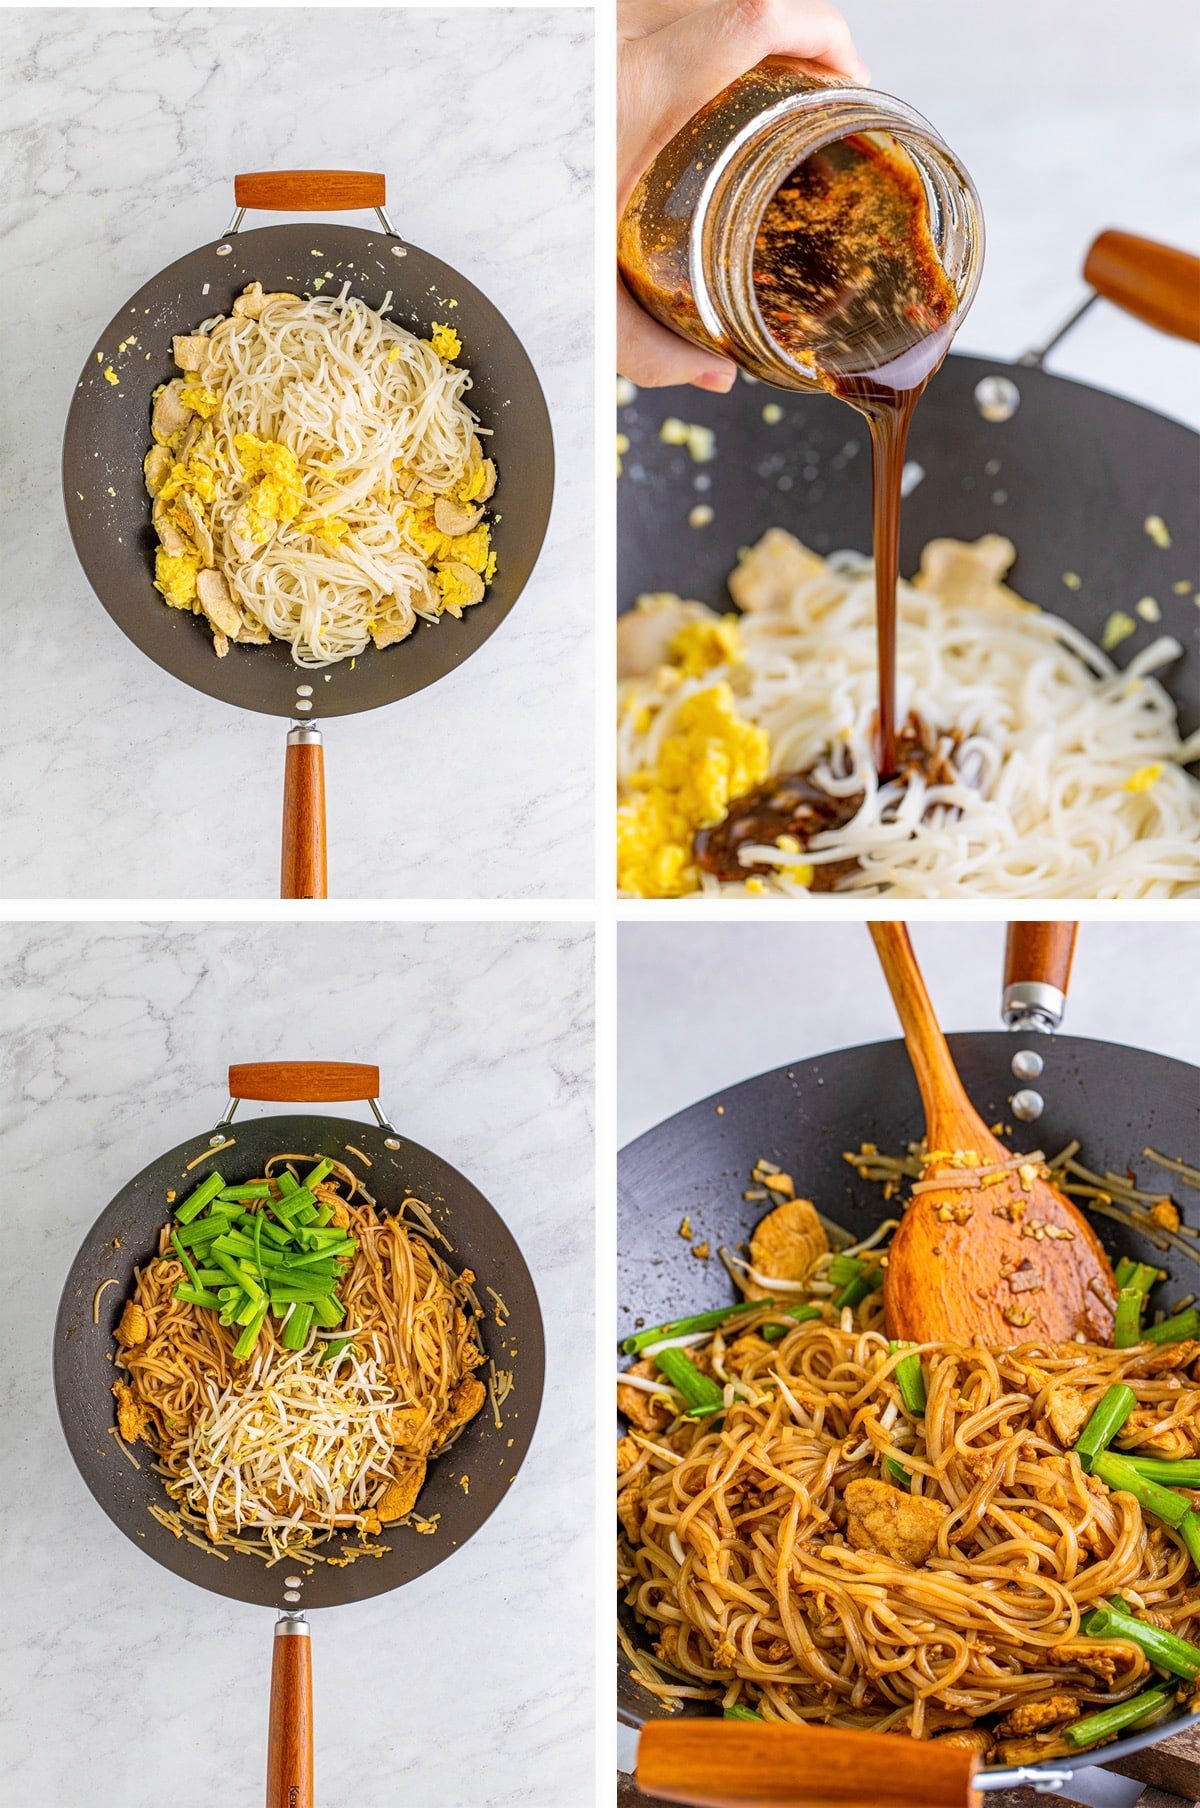 Collage of images showing the last steps of how to make spicy pad thai recipe